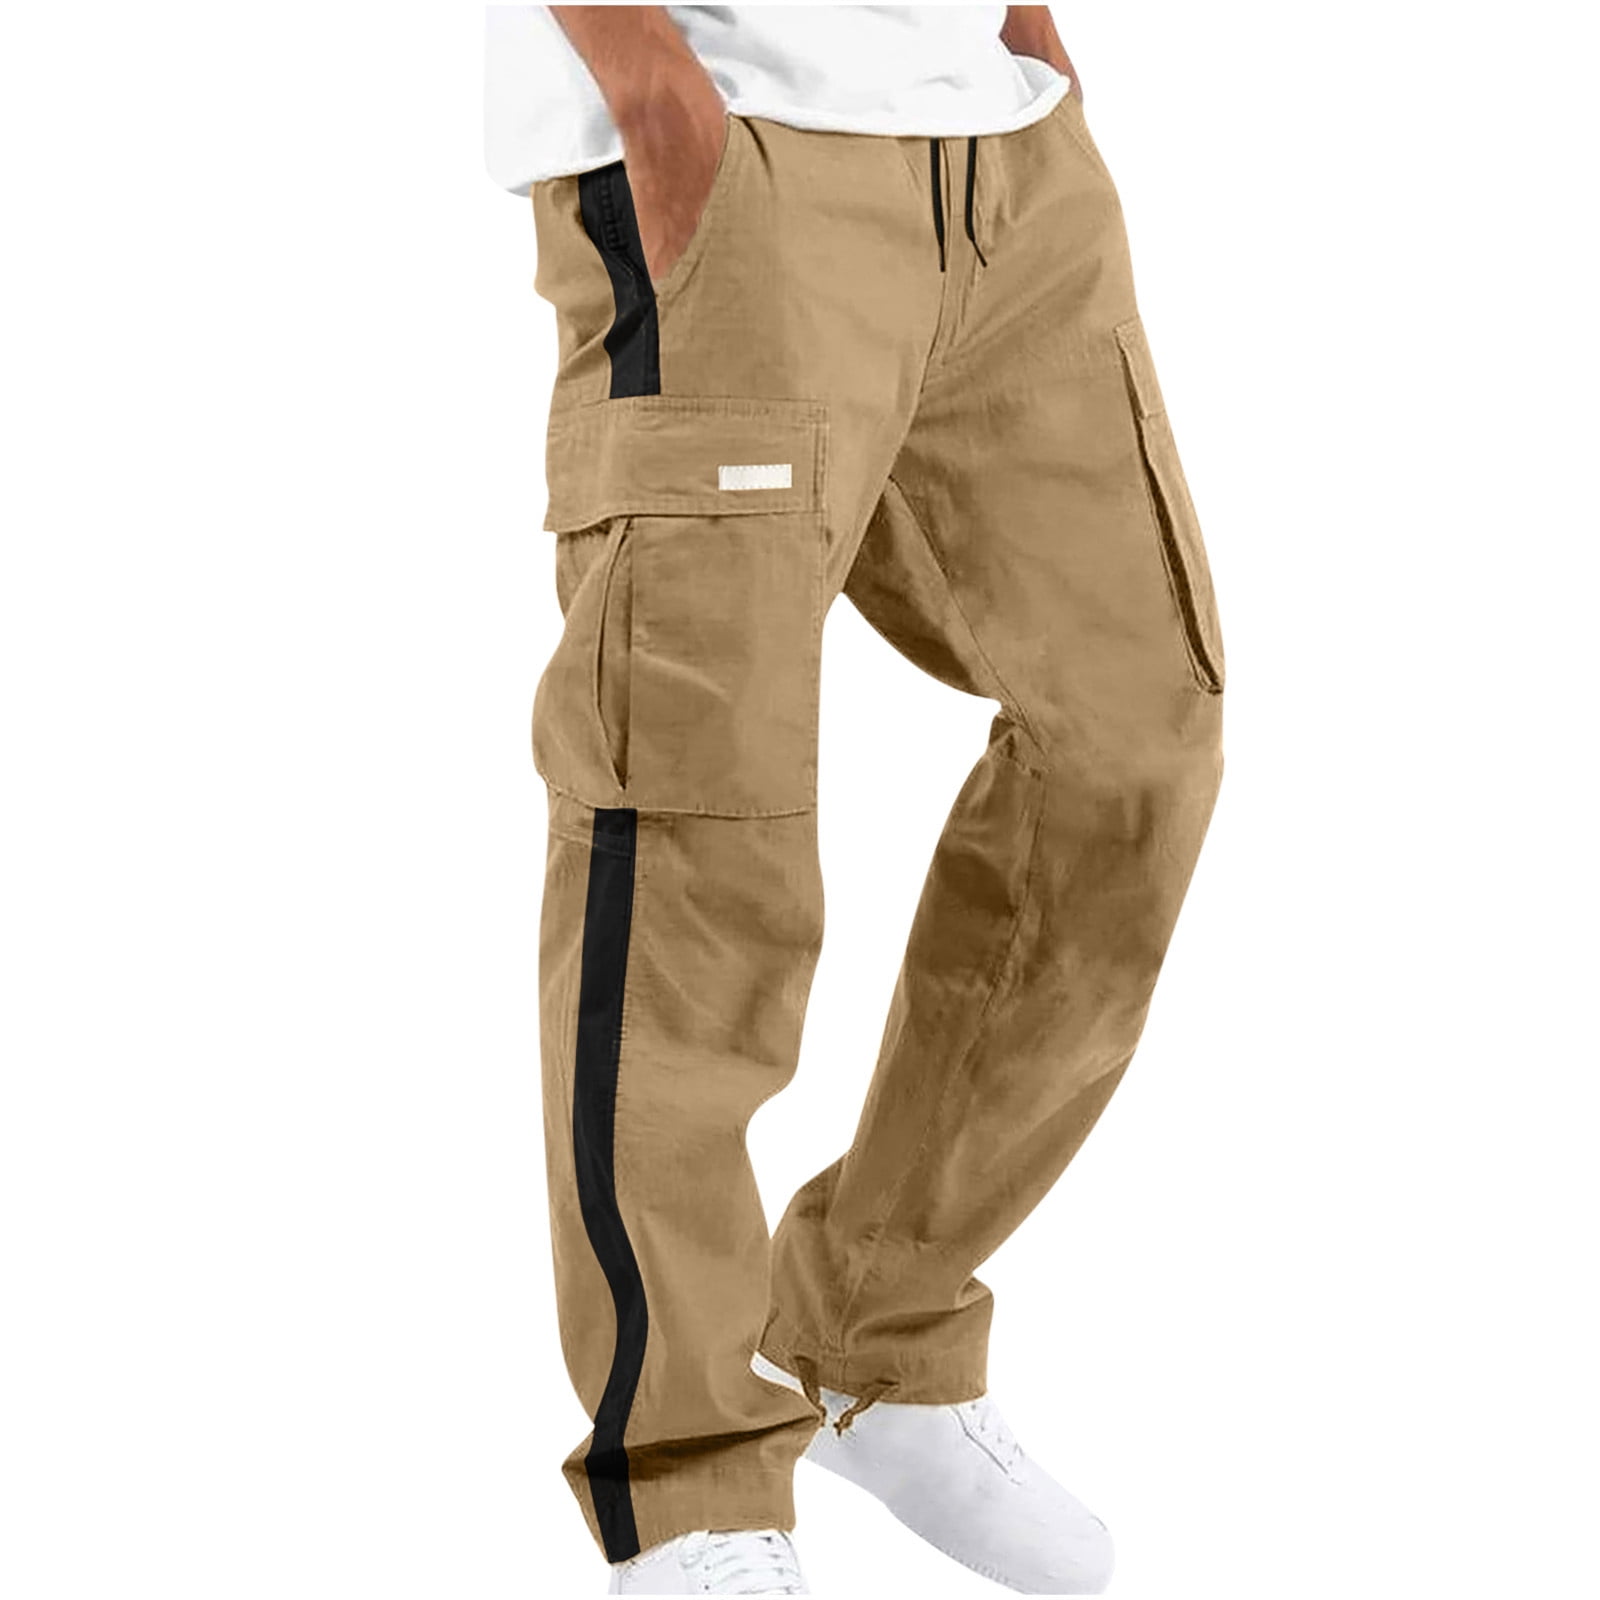 Cheap Men's Pants & Chinos | ASOS Outlet